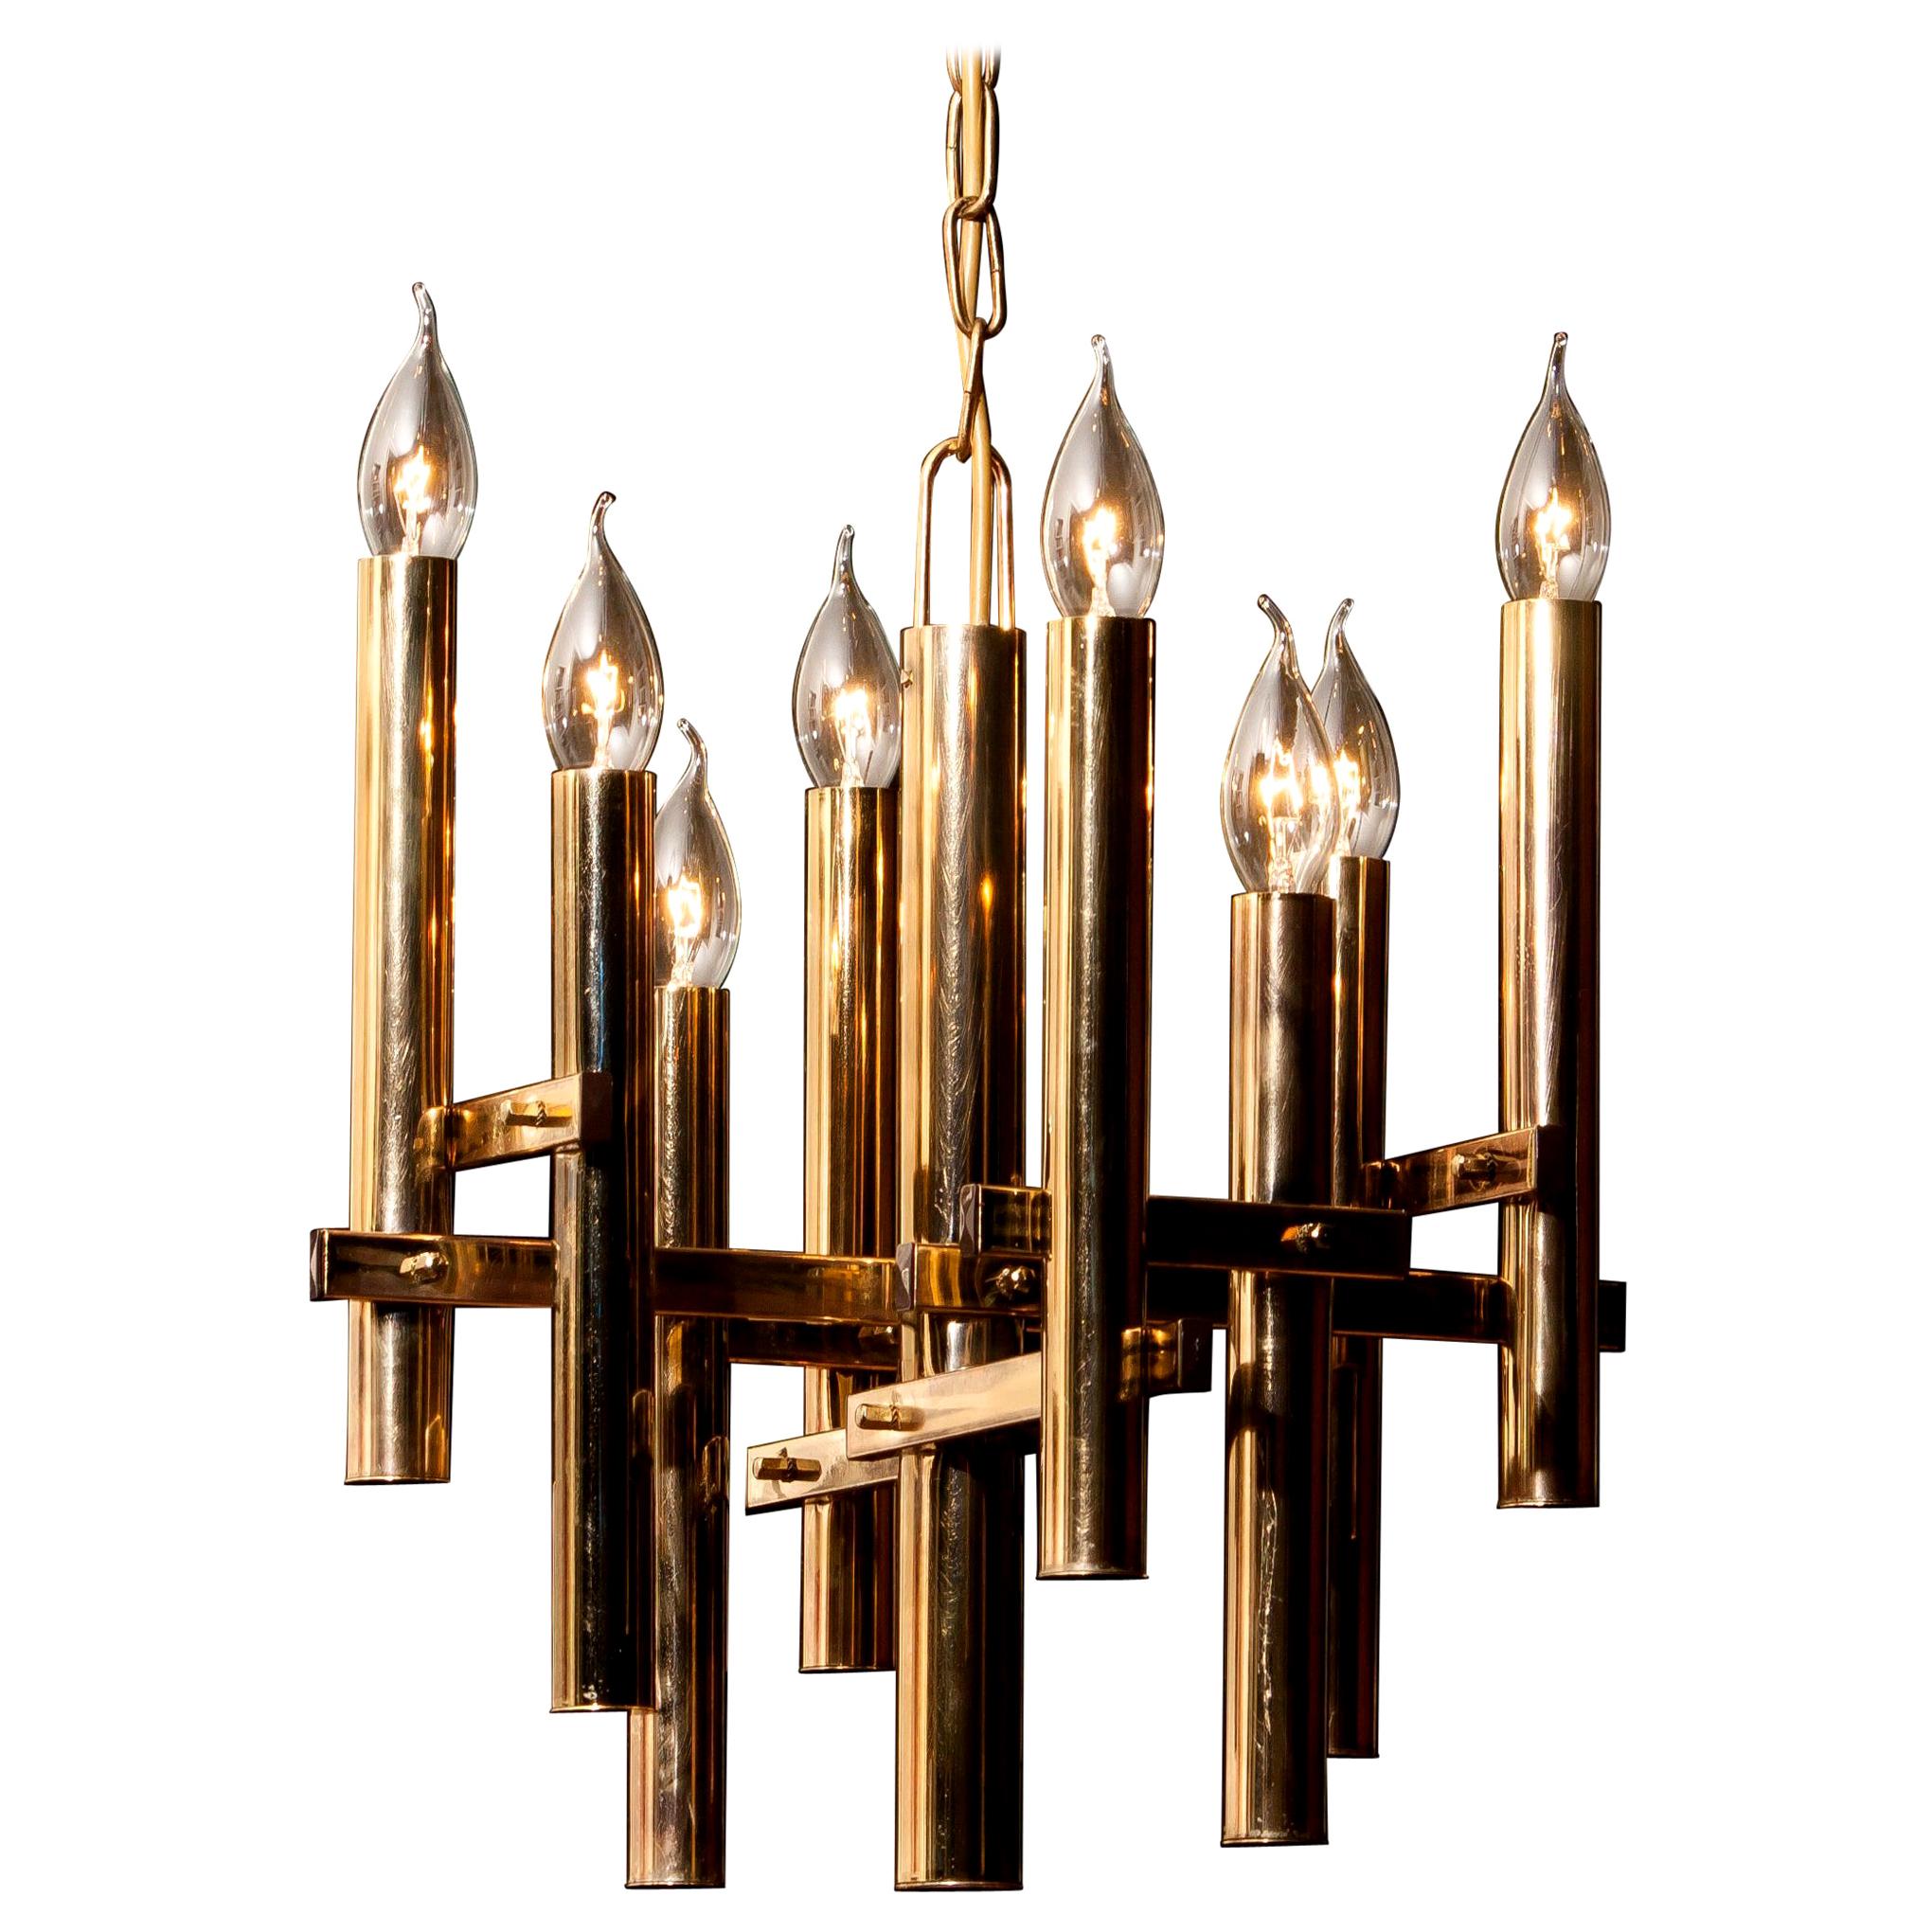 Beautiful brass pendant by Gaetano Sciolari, Italy.
This wonderful lamp has eight fittings.
The height is adjustable.
It is in excellent condition.
Period, 1960s.
Dimensions: H 93 cm, ø 40 cm.